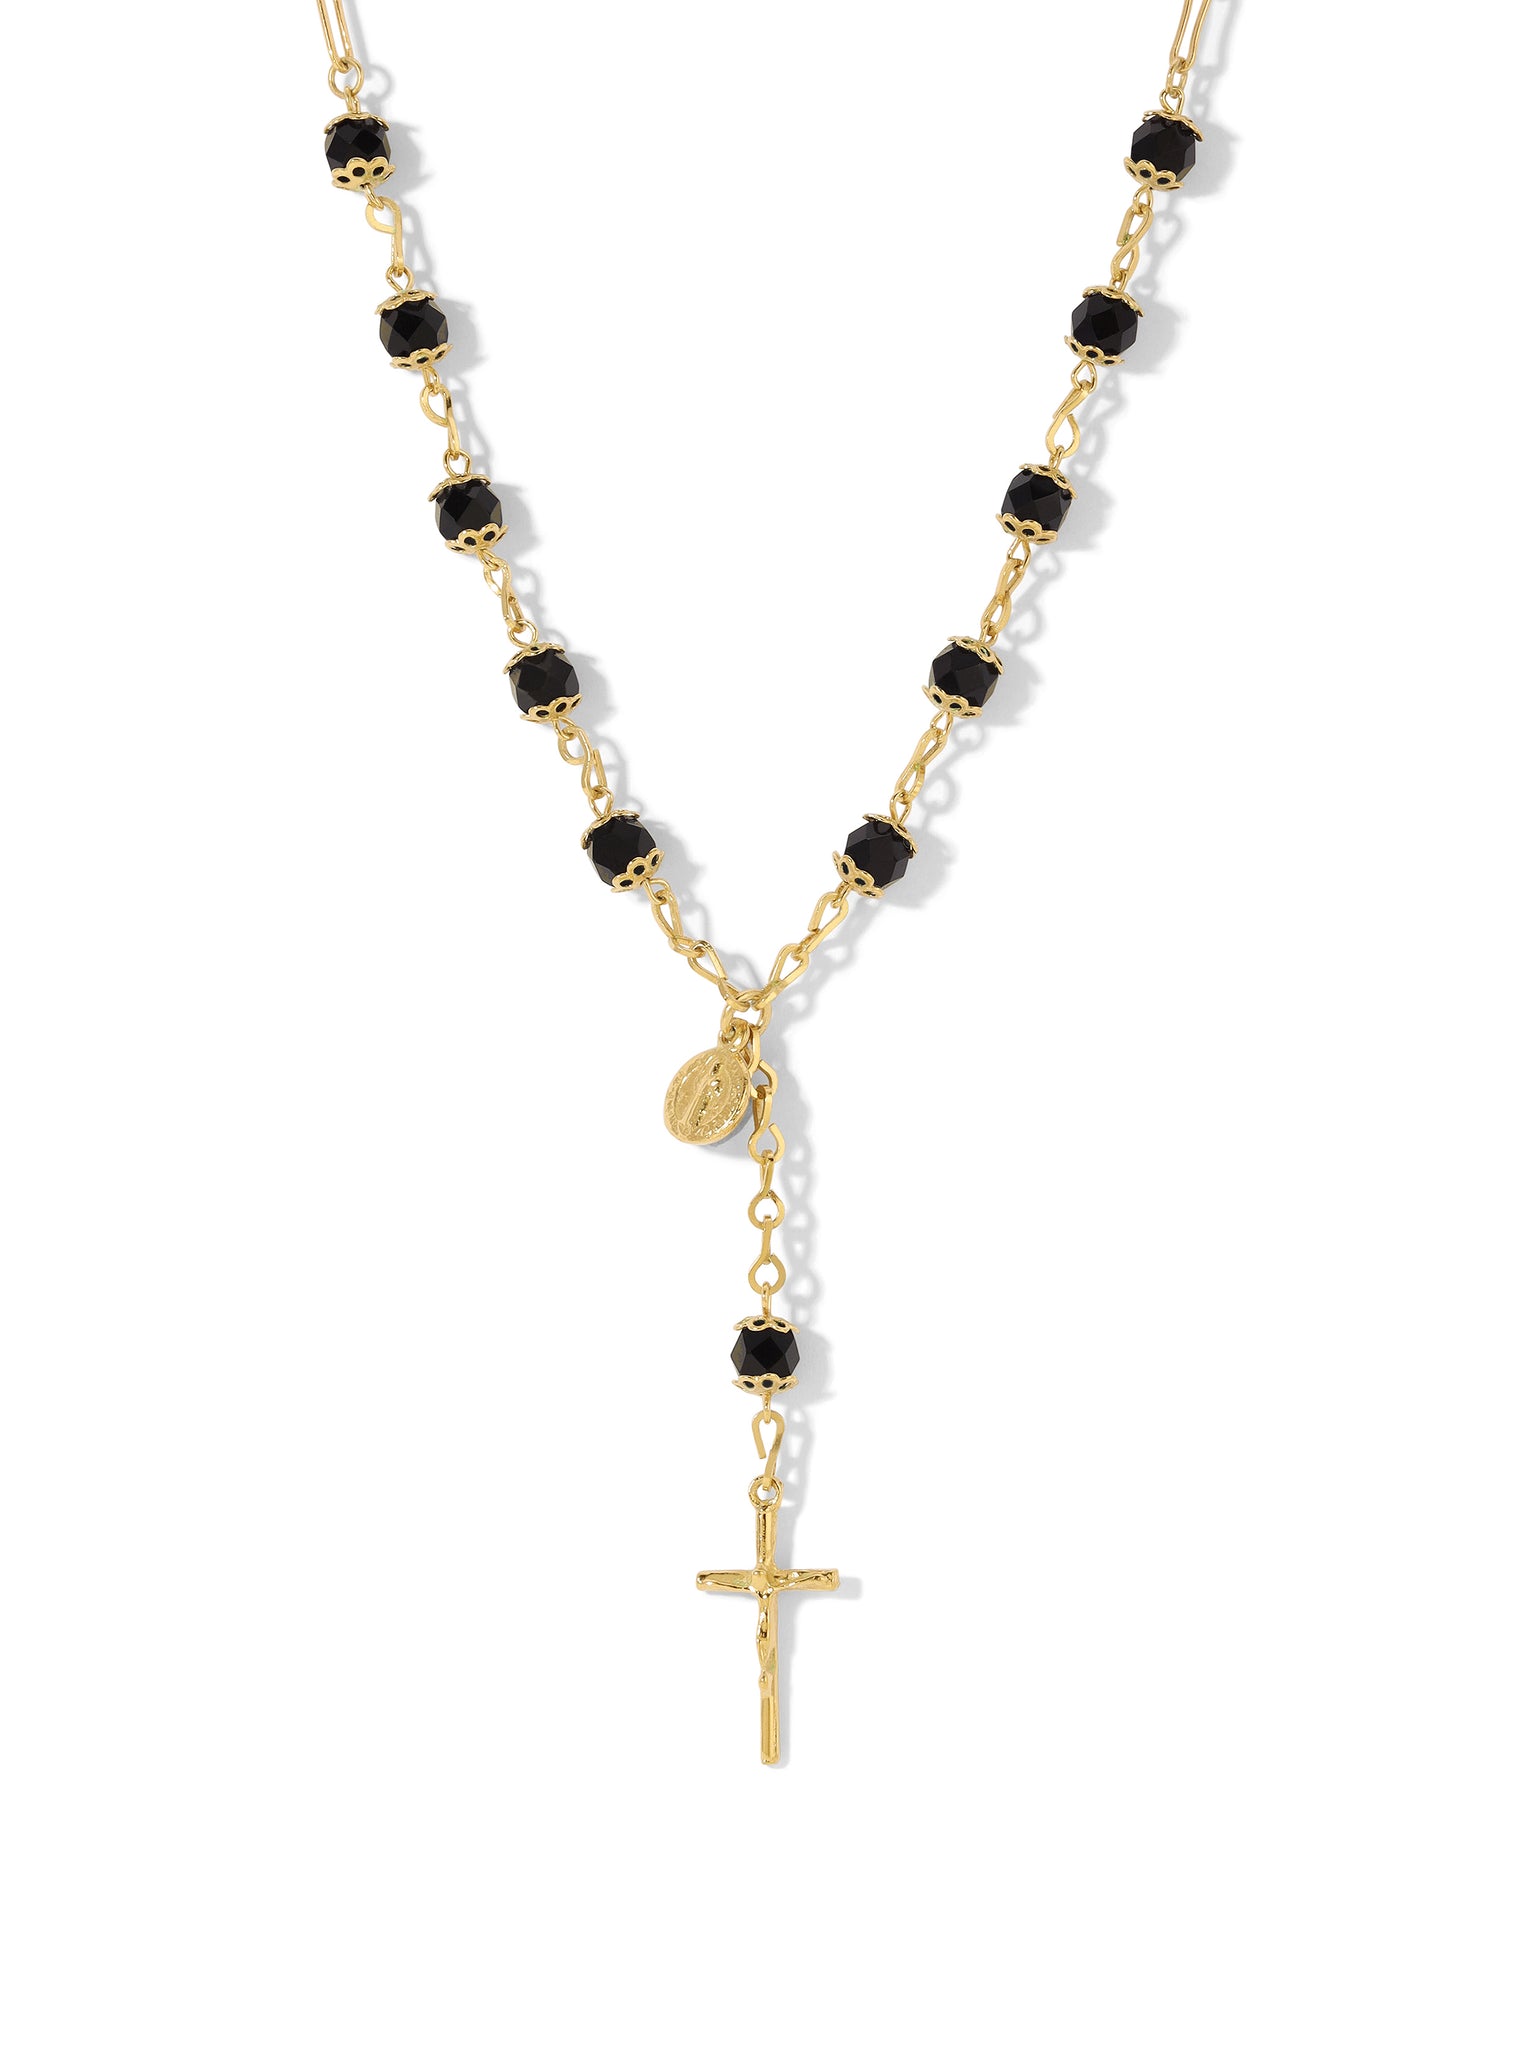 Gold Rosary Beads | Rankins Jewellers